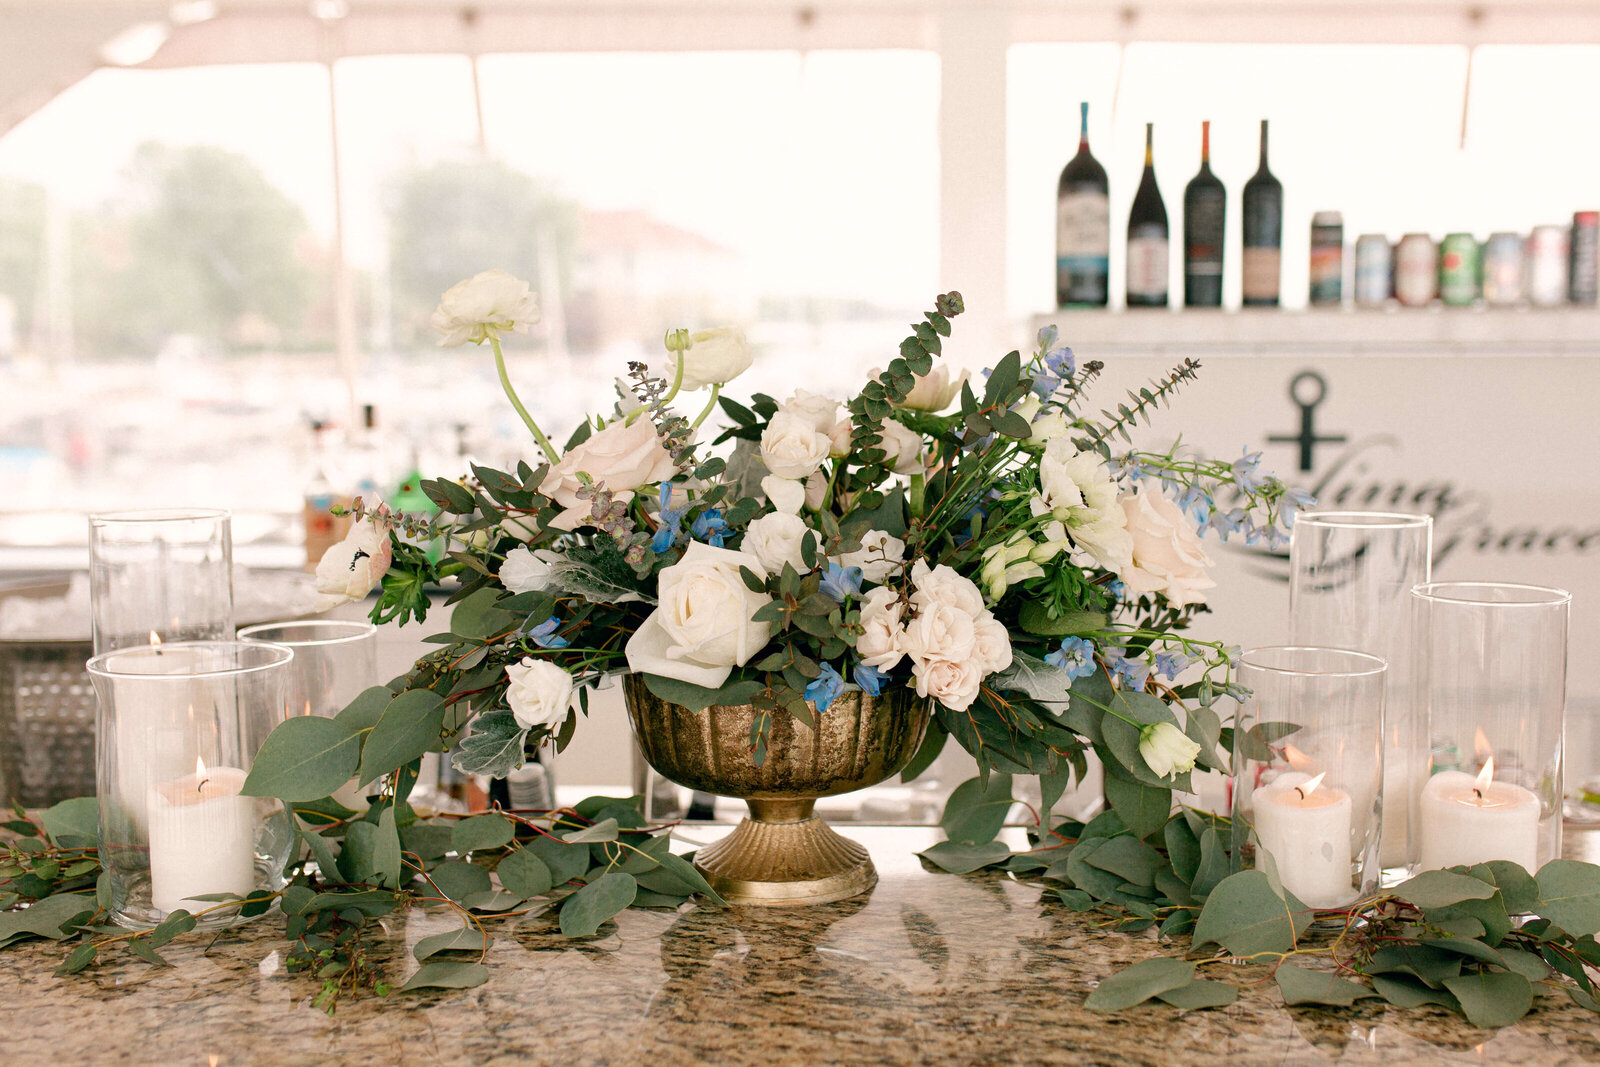 Virginia-Beach-Wedding-Planners-Sincerely-Jane-Events-8113